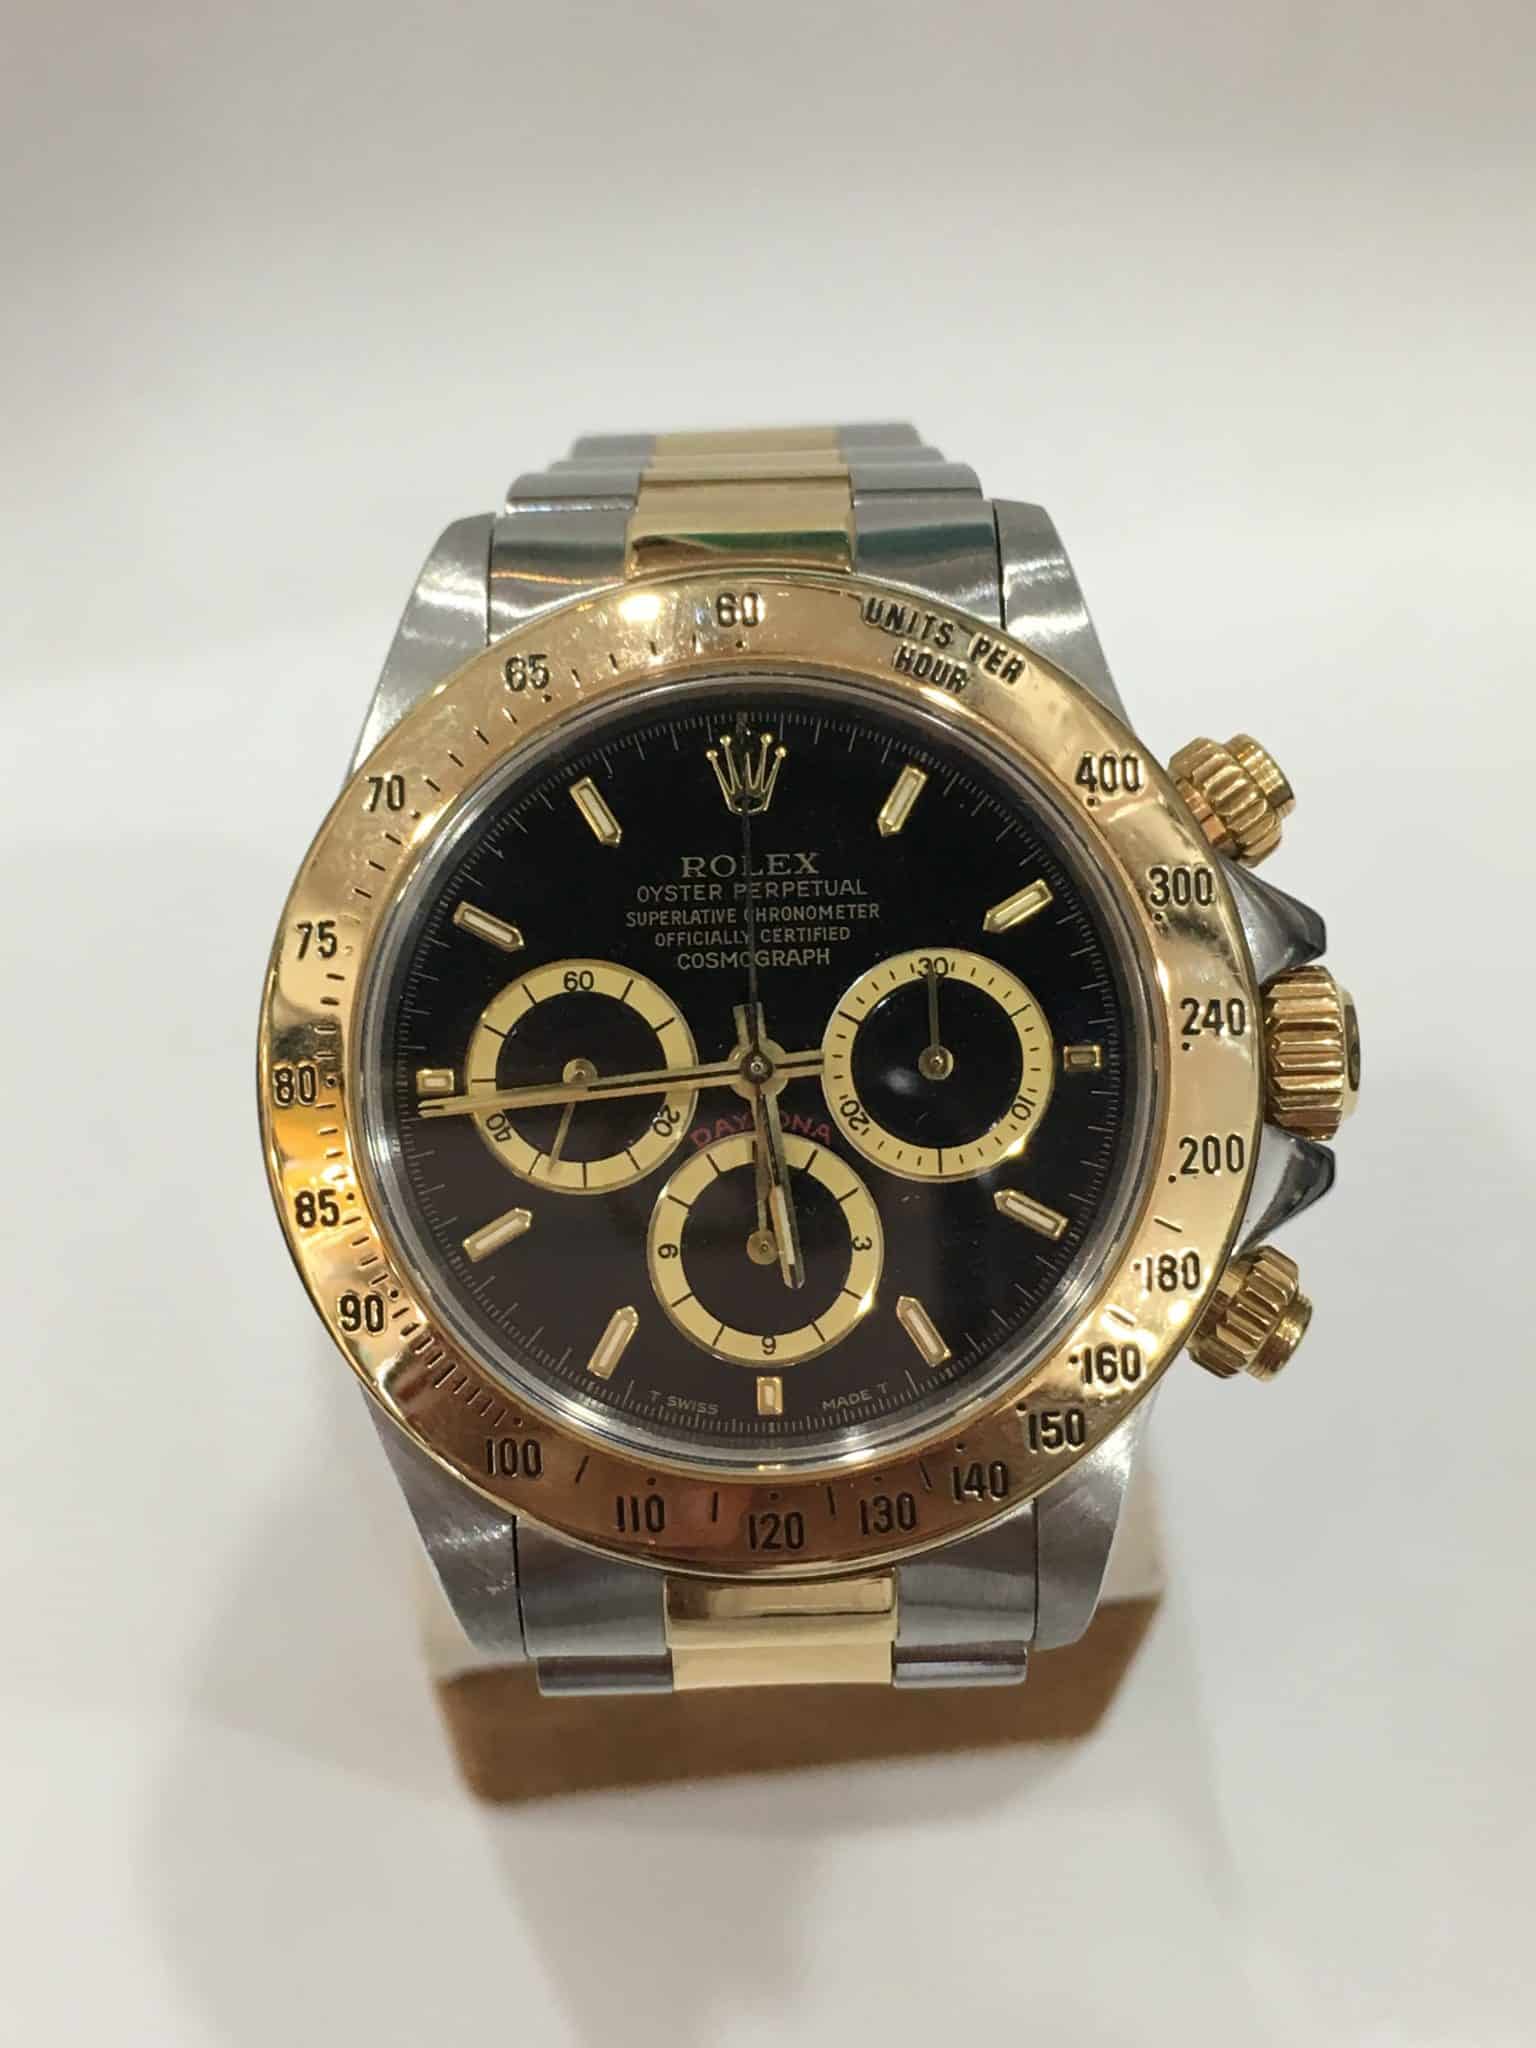 jewelry stores that sell rolex watches